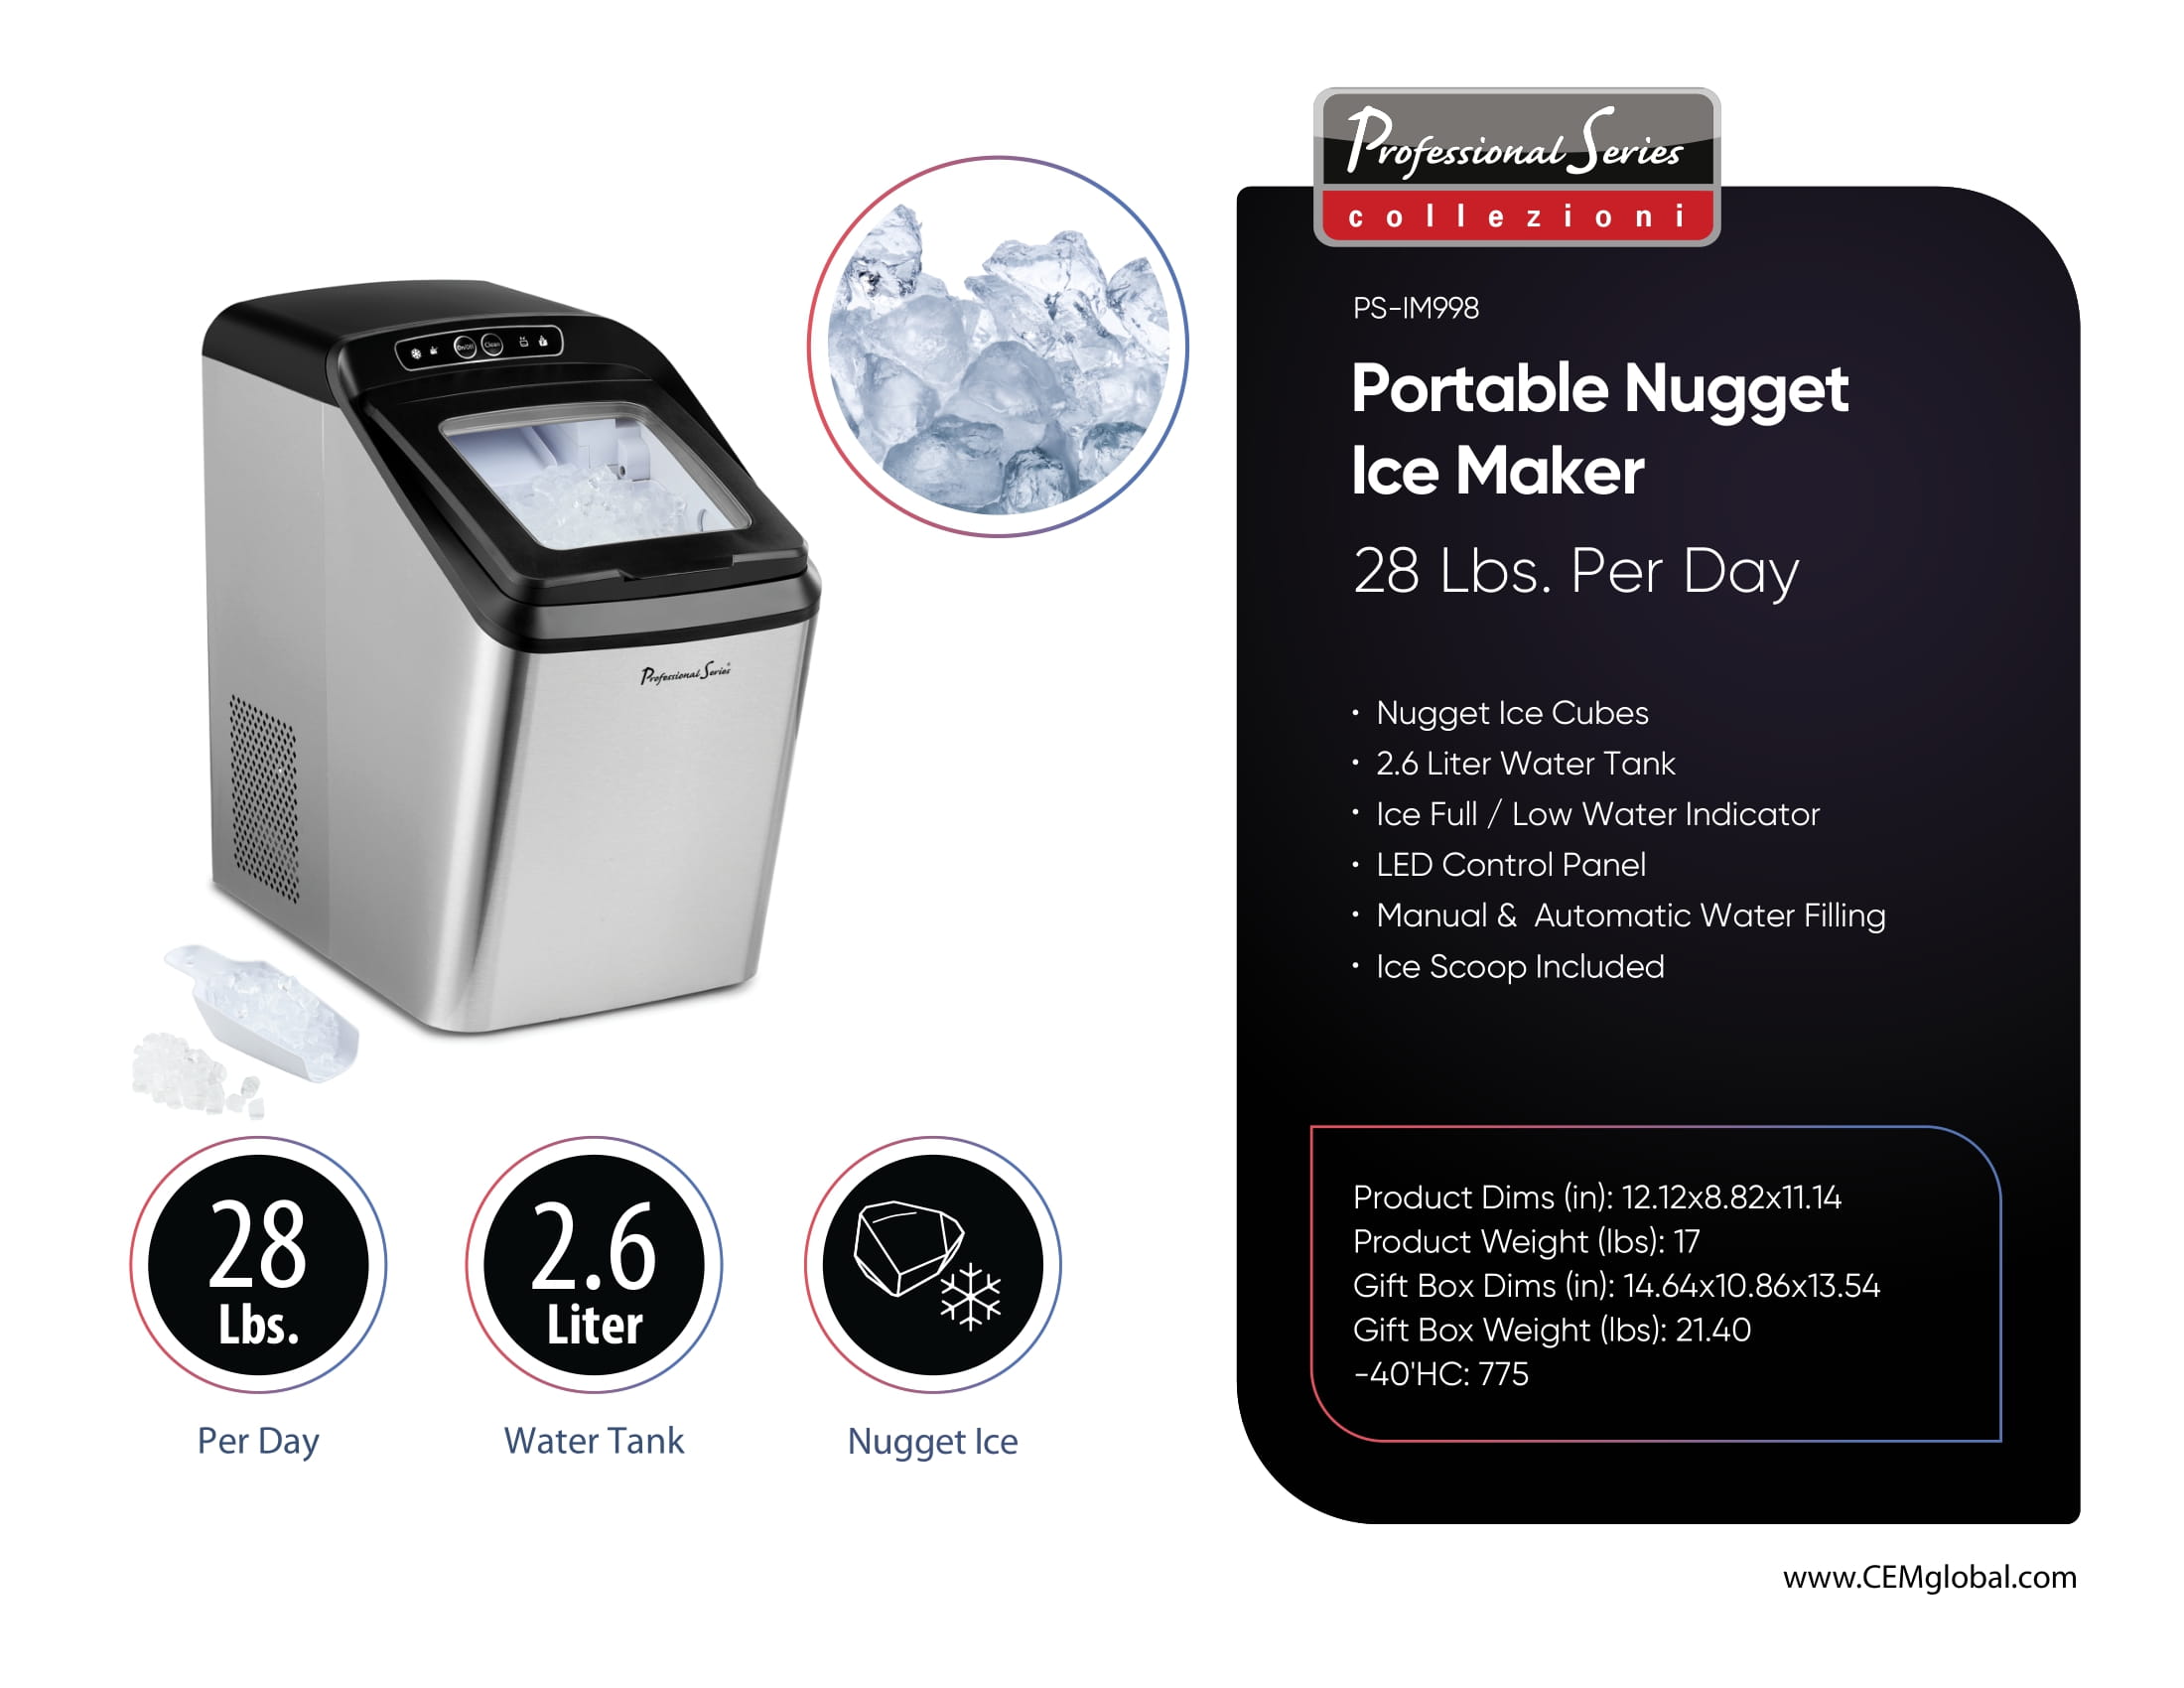 Portable Nugget Ice Maker 28 Lbs.